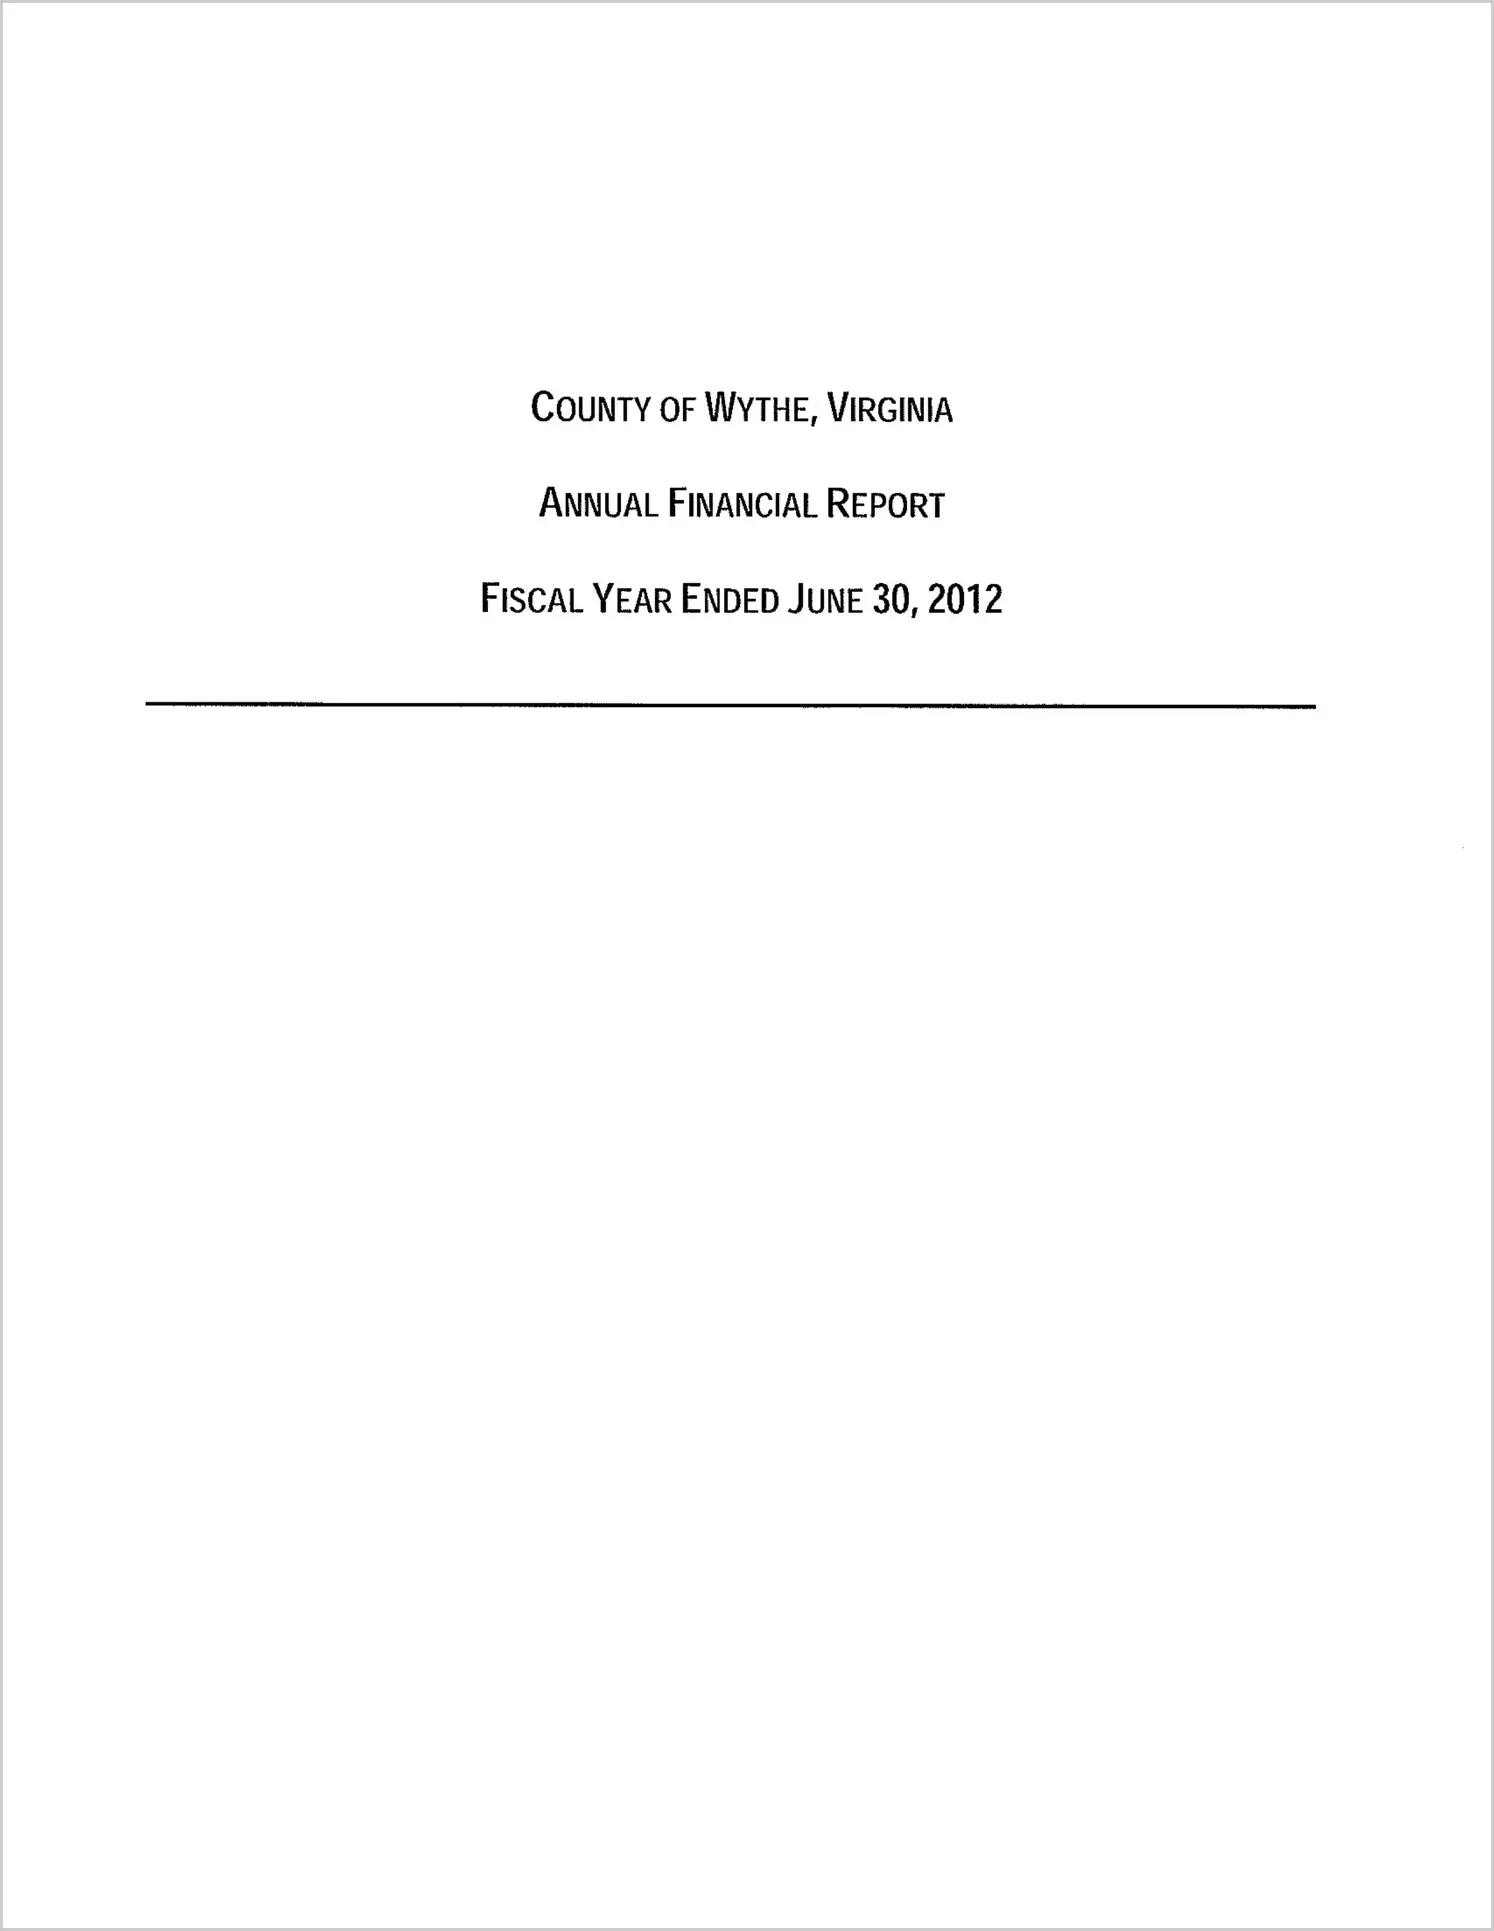 2012 Annual Financial Report for County of Wythe